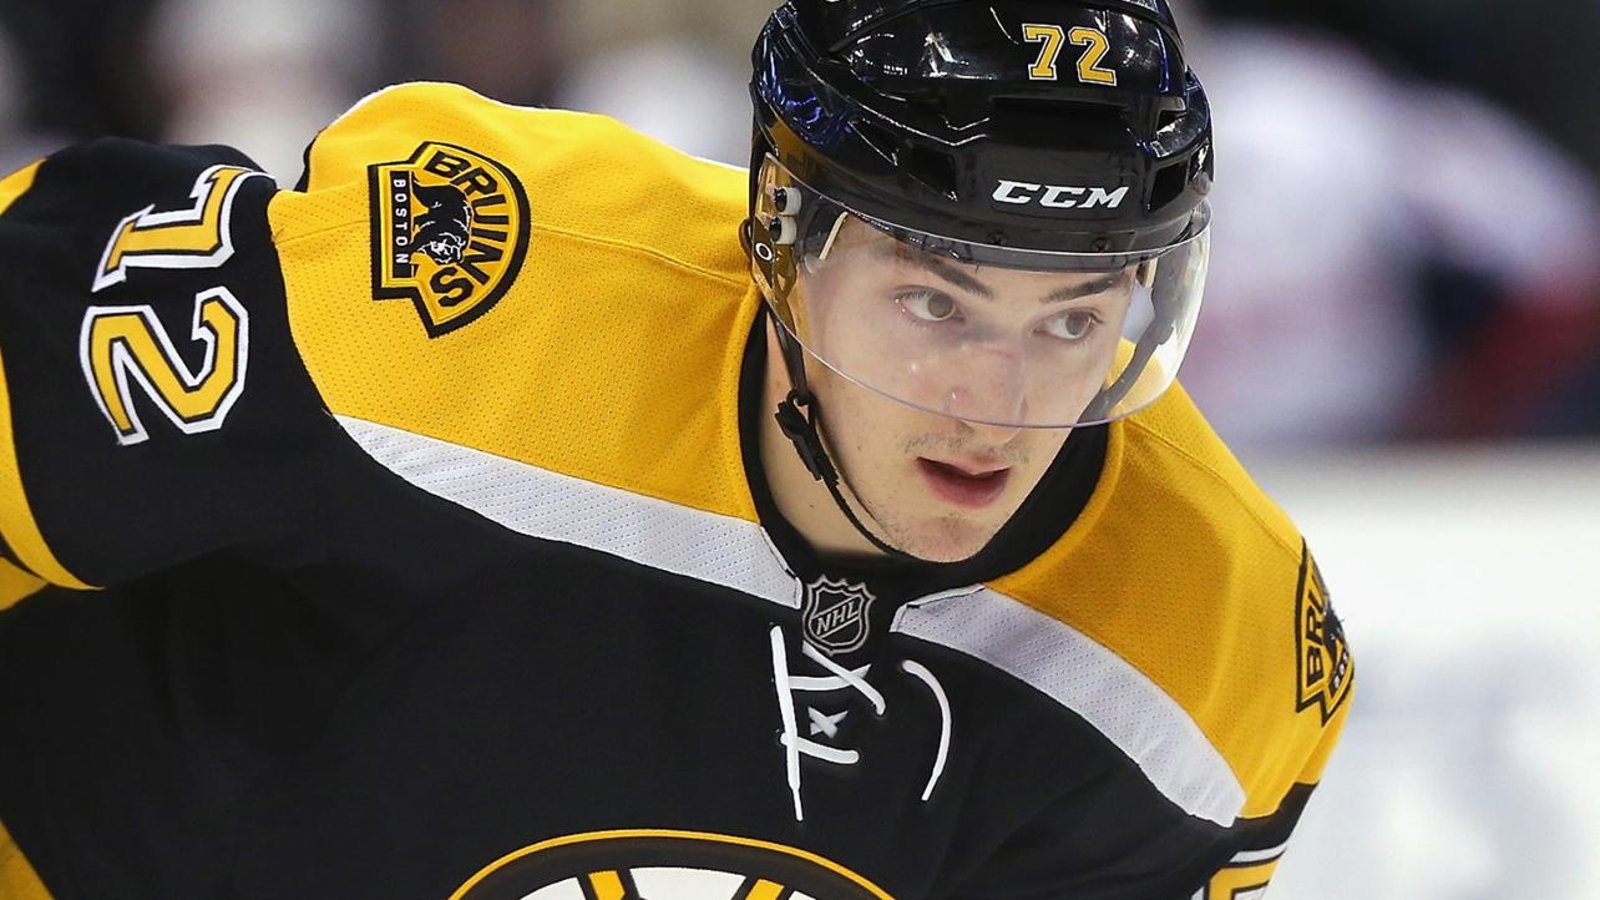 Bruins' already dealing with injured player